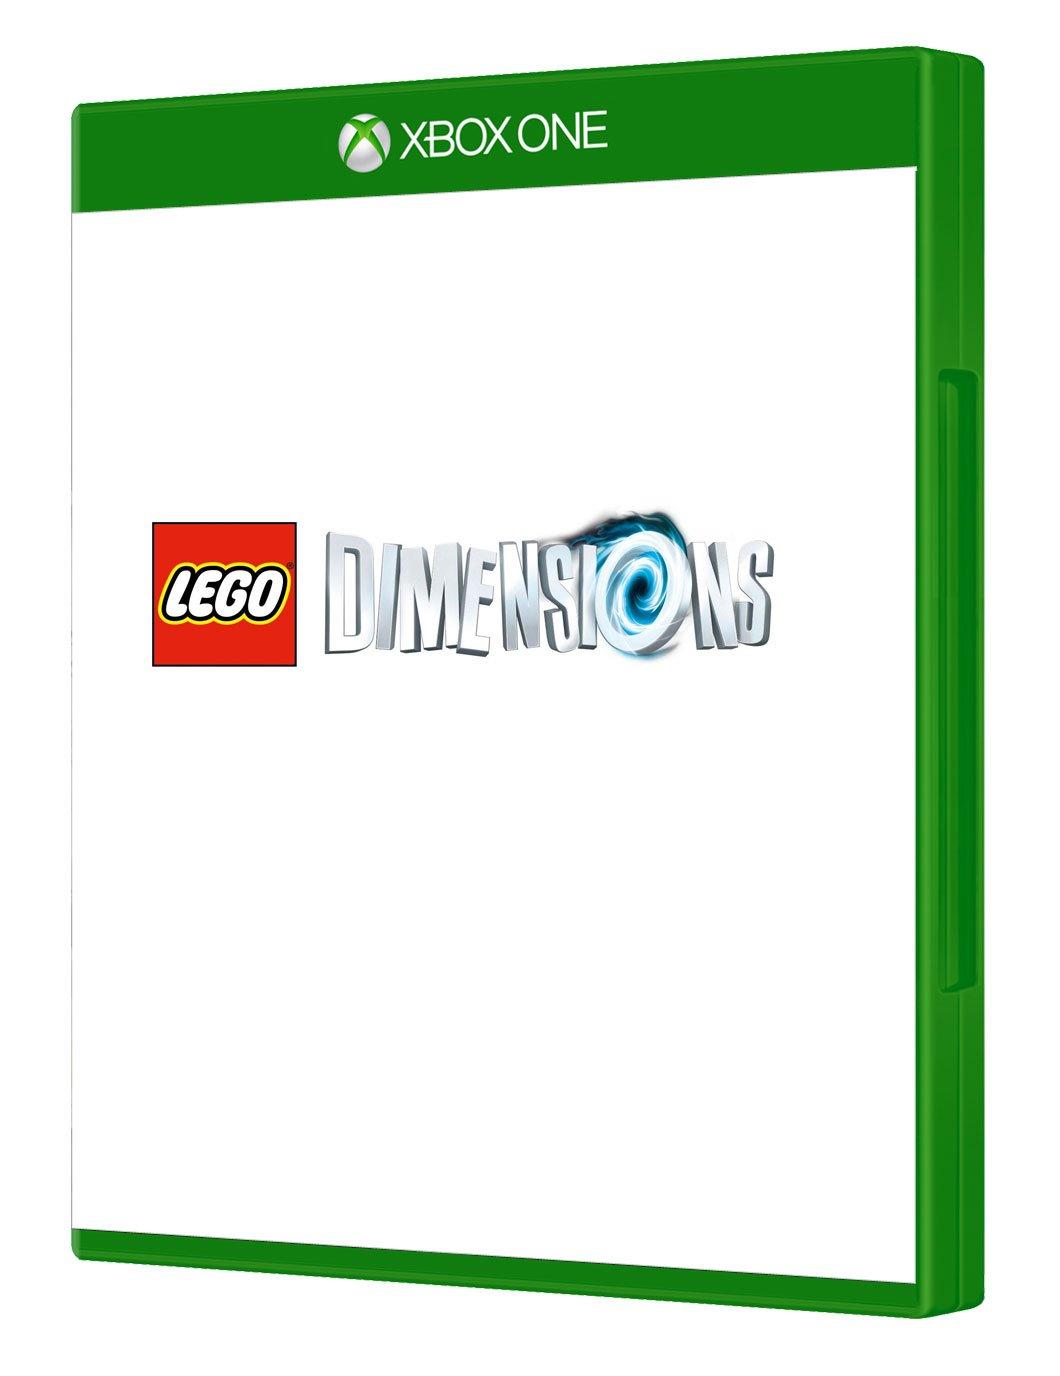 LEGO Dimensions Video Game - Xbox One, Xbox One